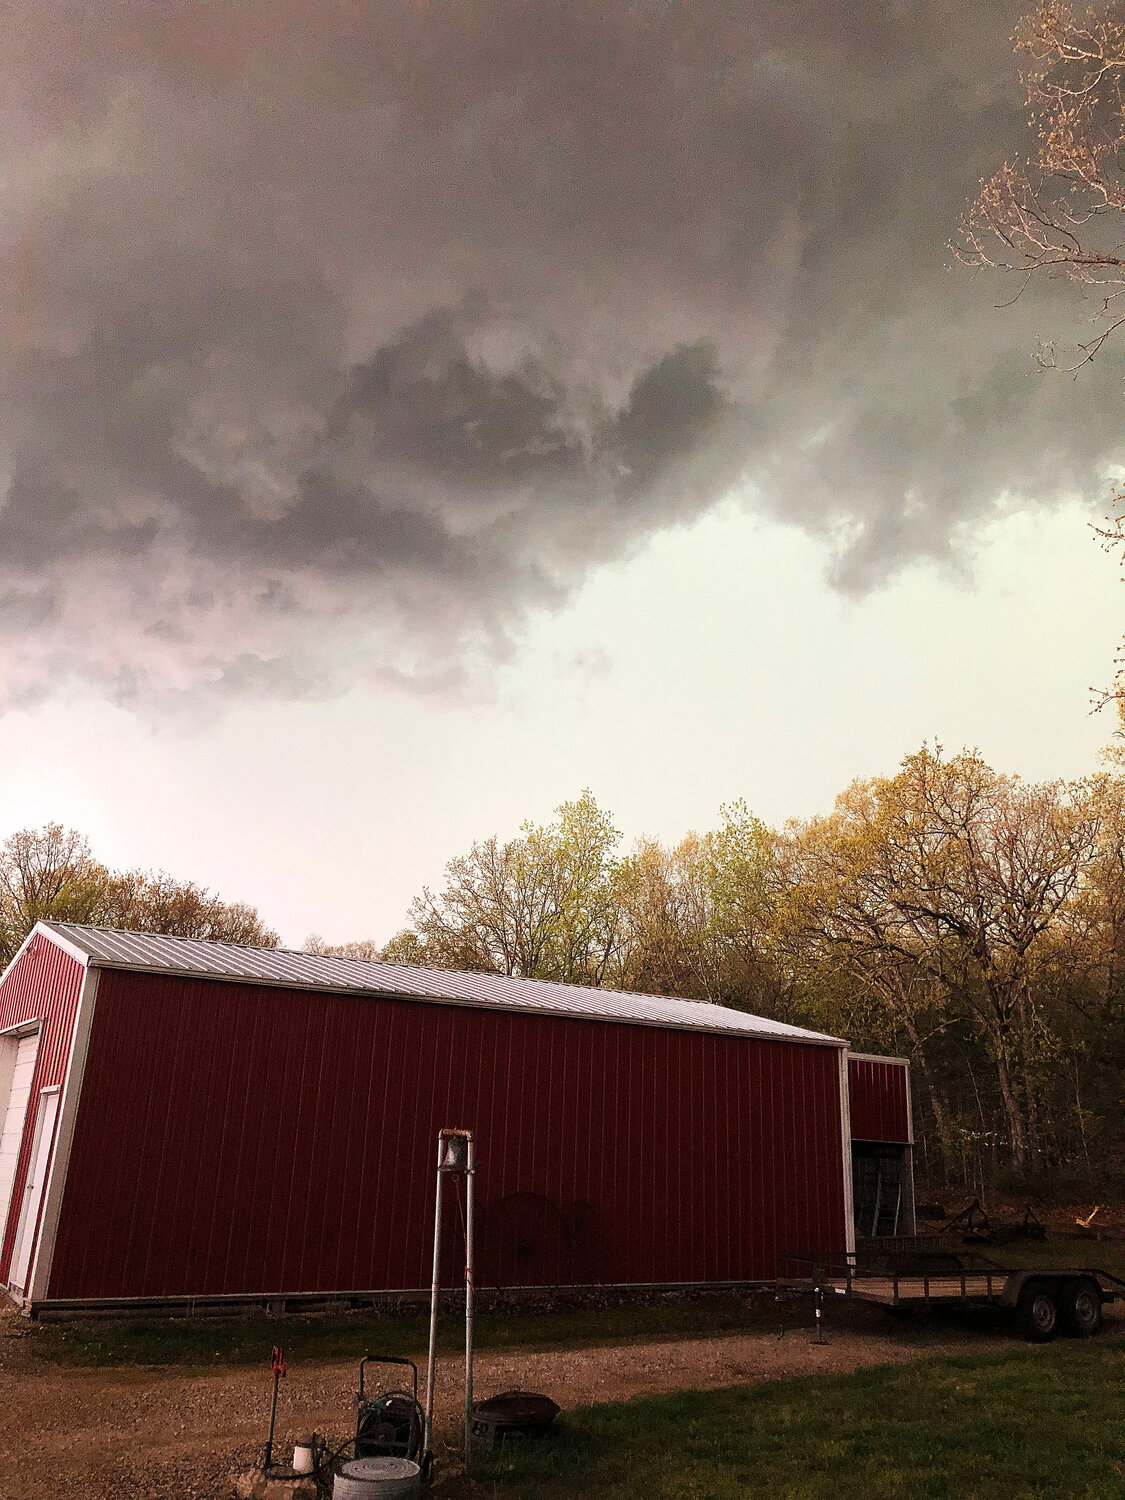 Threatening clouds pass over the southern Gasconade County residence of Terry and Tammy Havelka. Hail soon covered their yard.